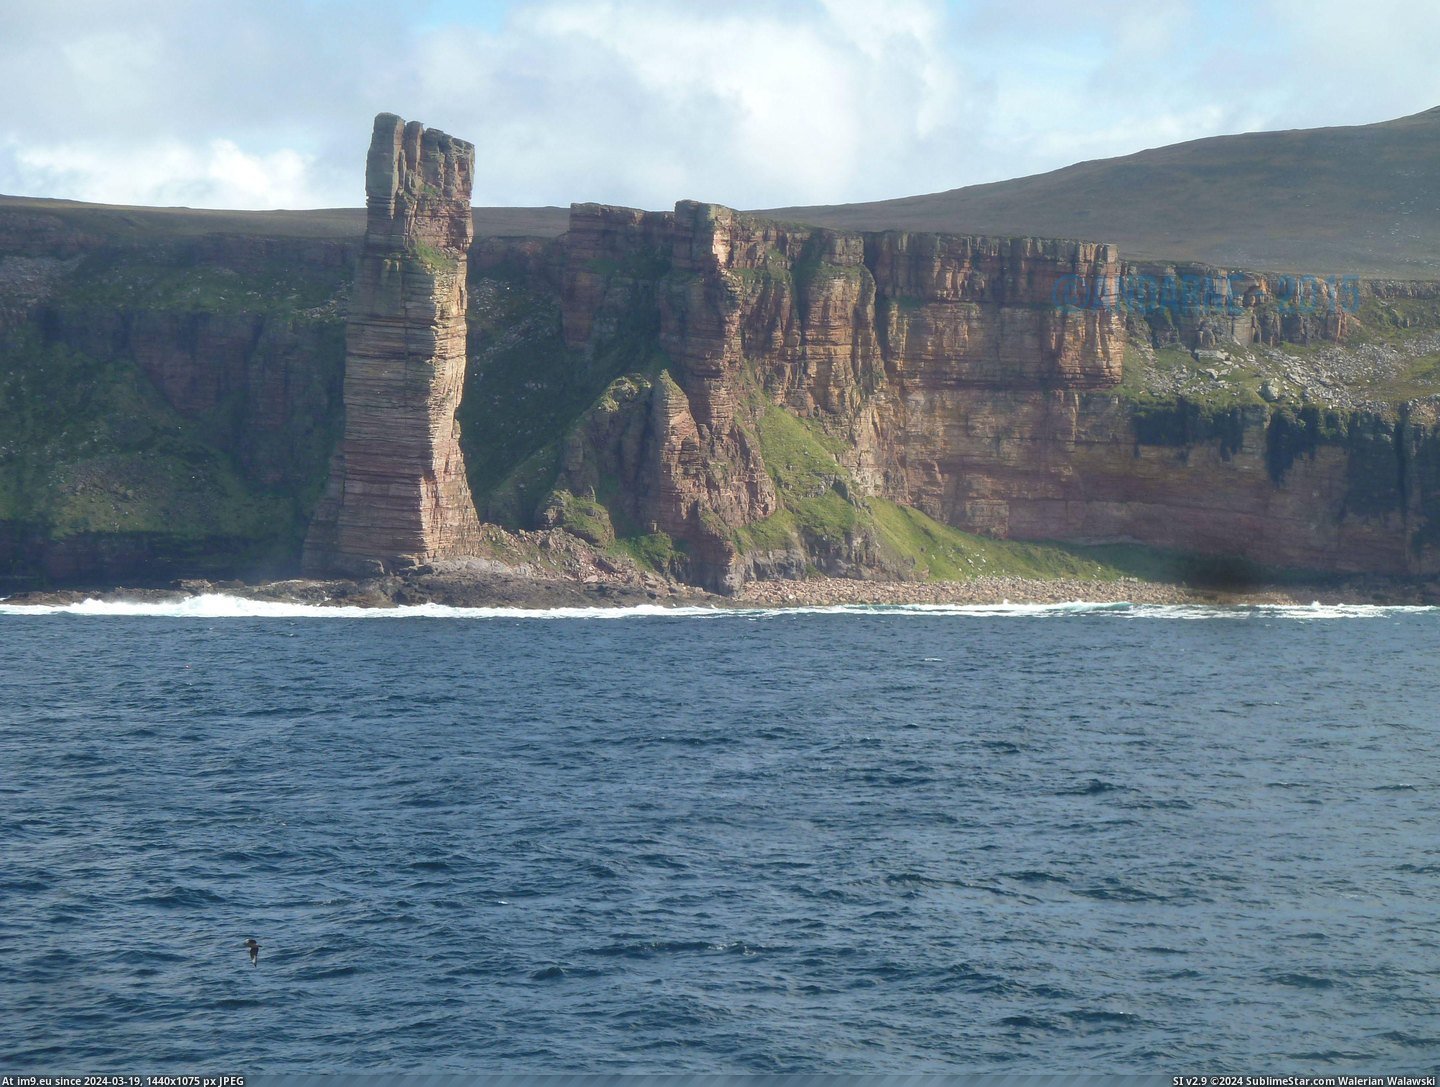 #Old #Flow #Man [Earthporn]  [3600x2700] The Old Man of Hoy, Scapa Flow - 2013 Pic. (Изображение из альбом My r/EARTHPORN favs))